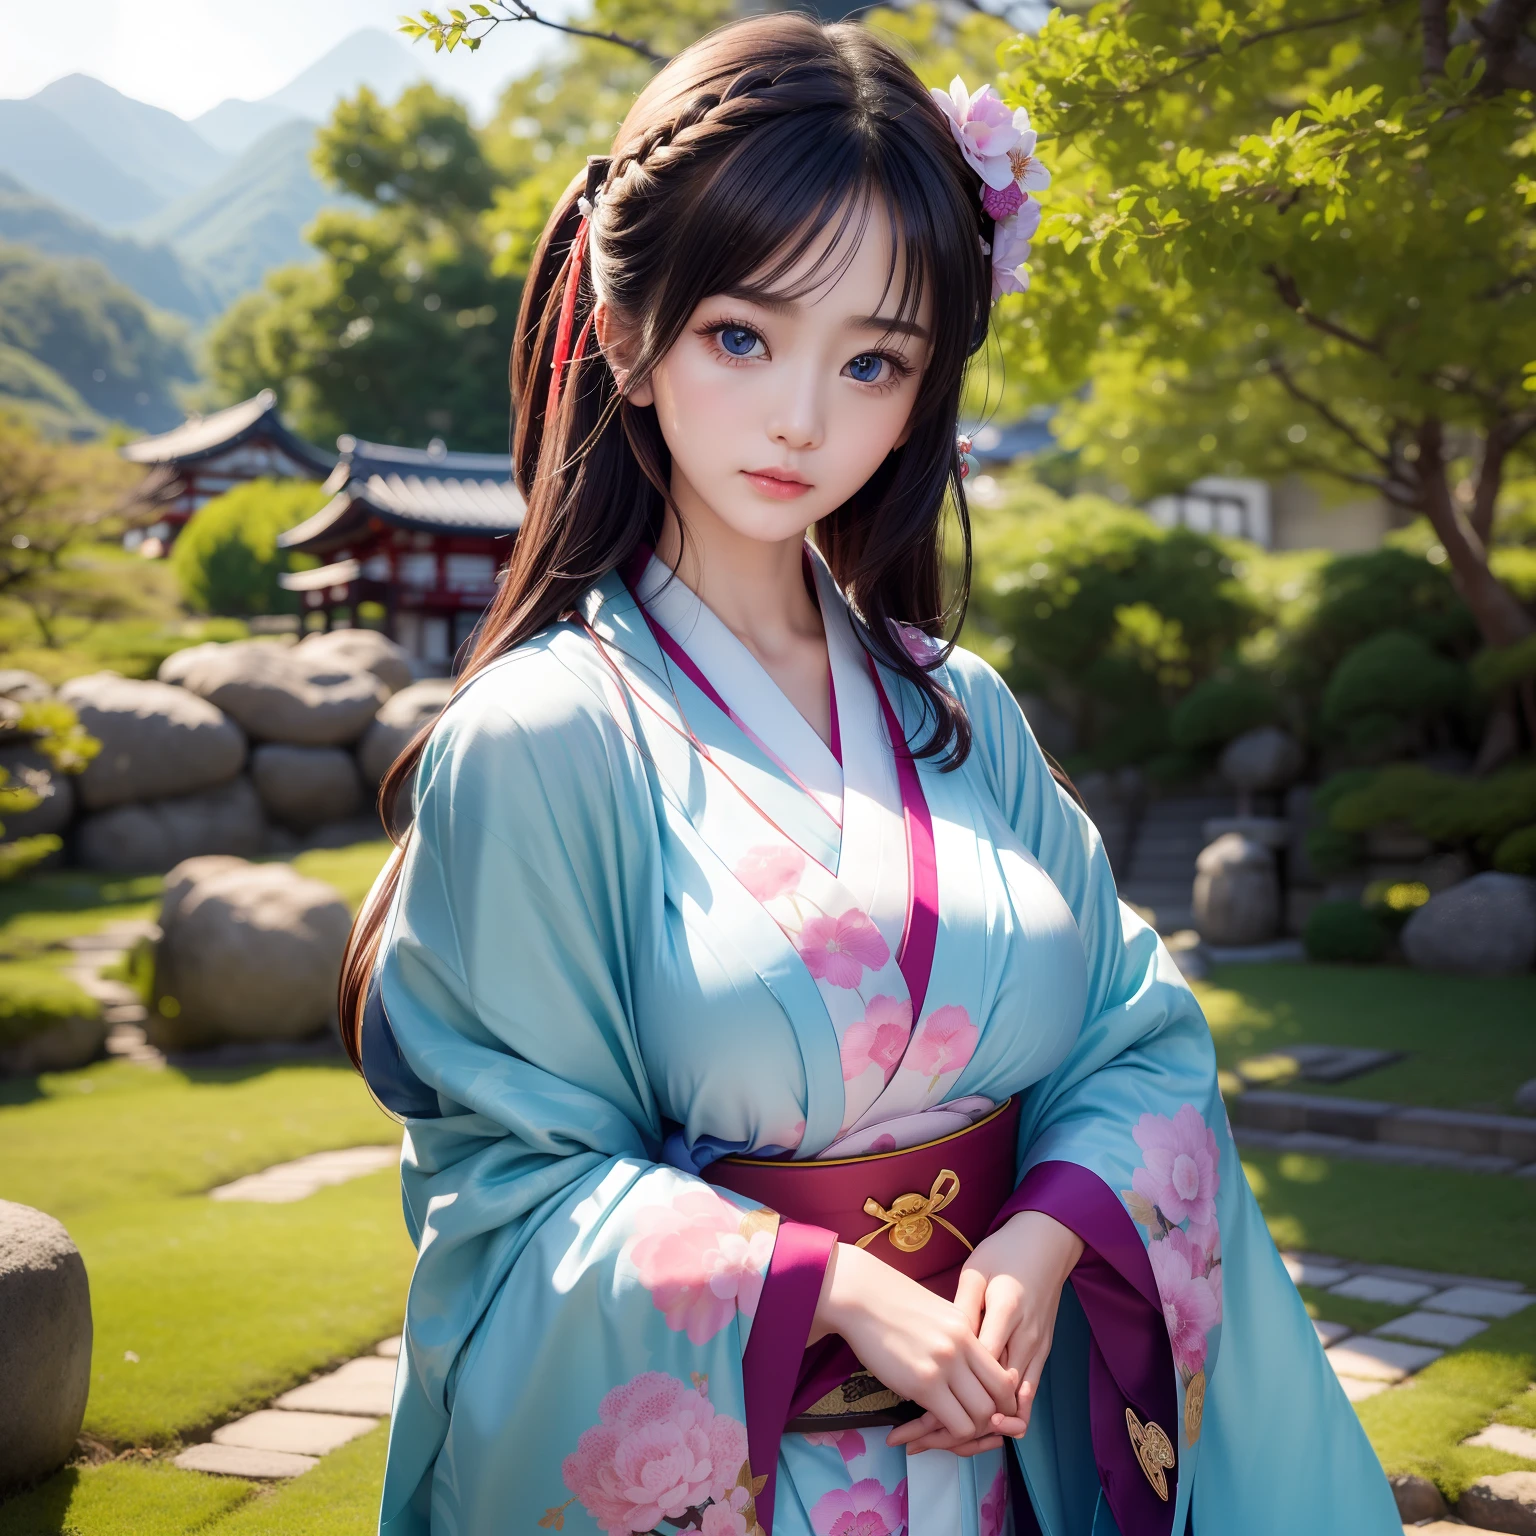 High quality、２５Pretty woman of year old、Slender beauty、Wear a traditional kimono with gorgeous Japan、Hairpin、can、Expensive obi、Big beautiful blue eyes、Detailed cute face、(((solo)))、Dignified behavior、Gion、Kiyomizu-dera Temple、under a cherry blossom tree